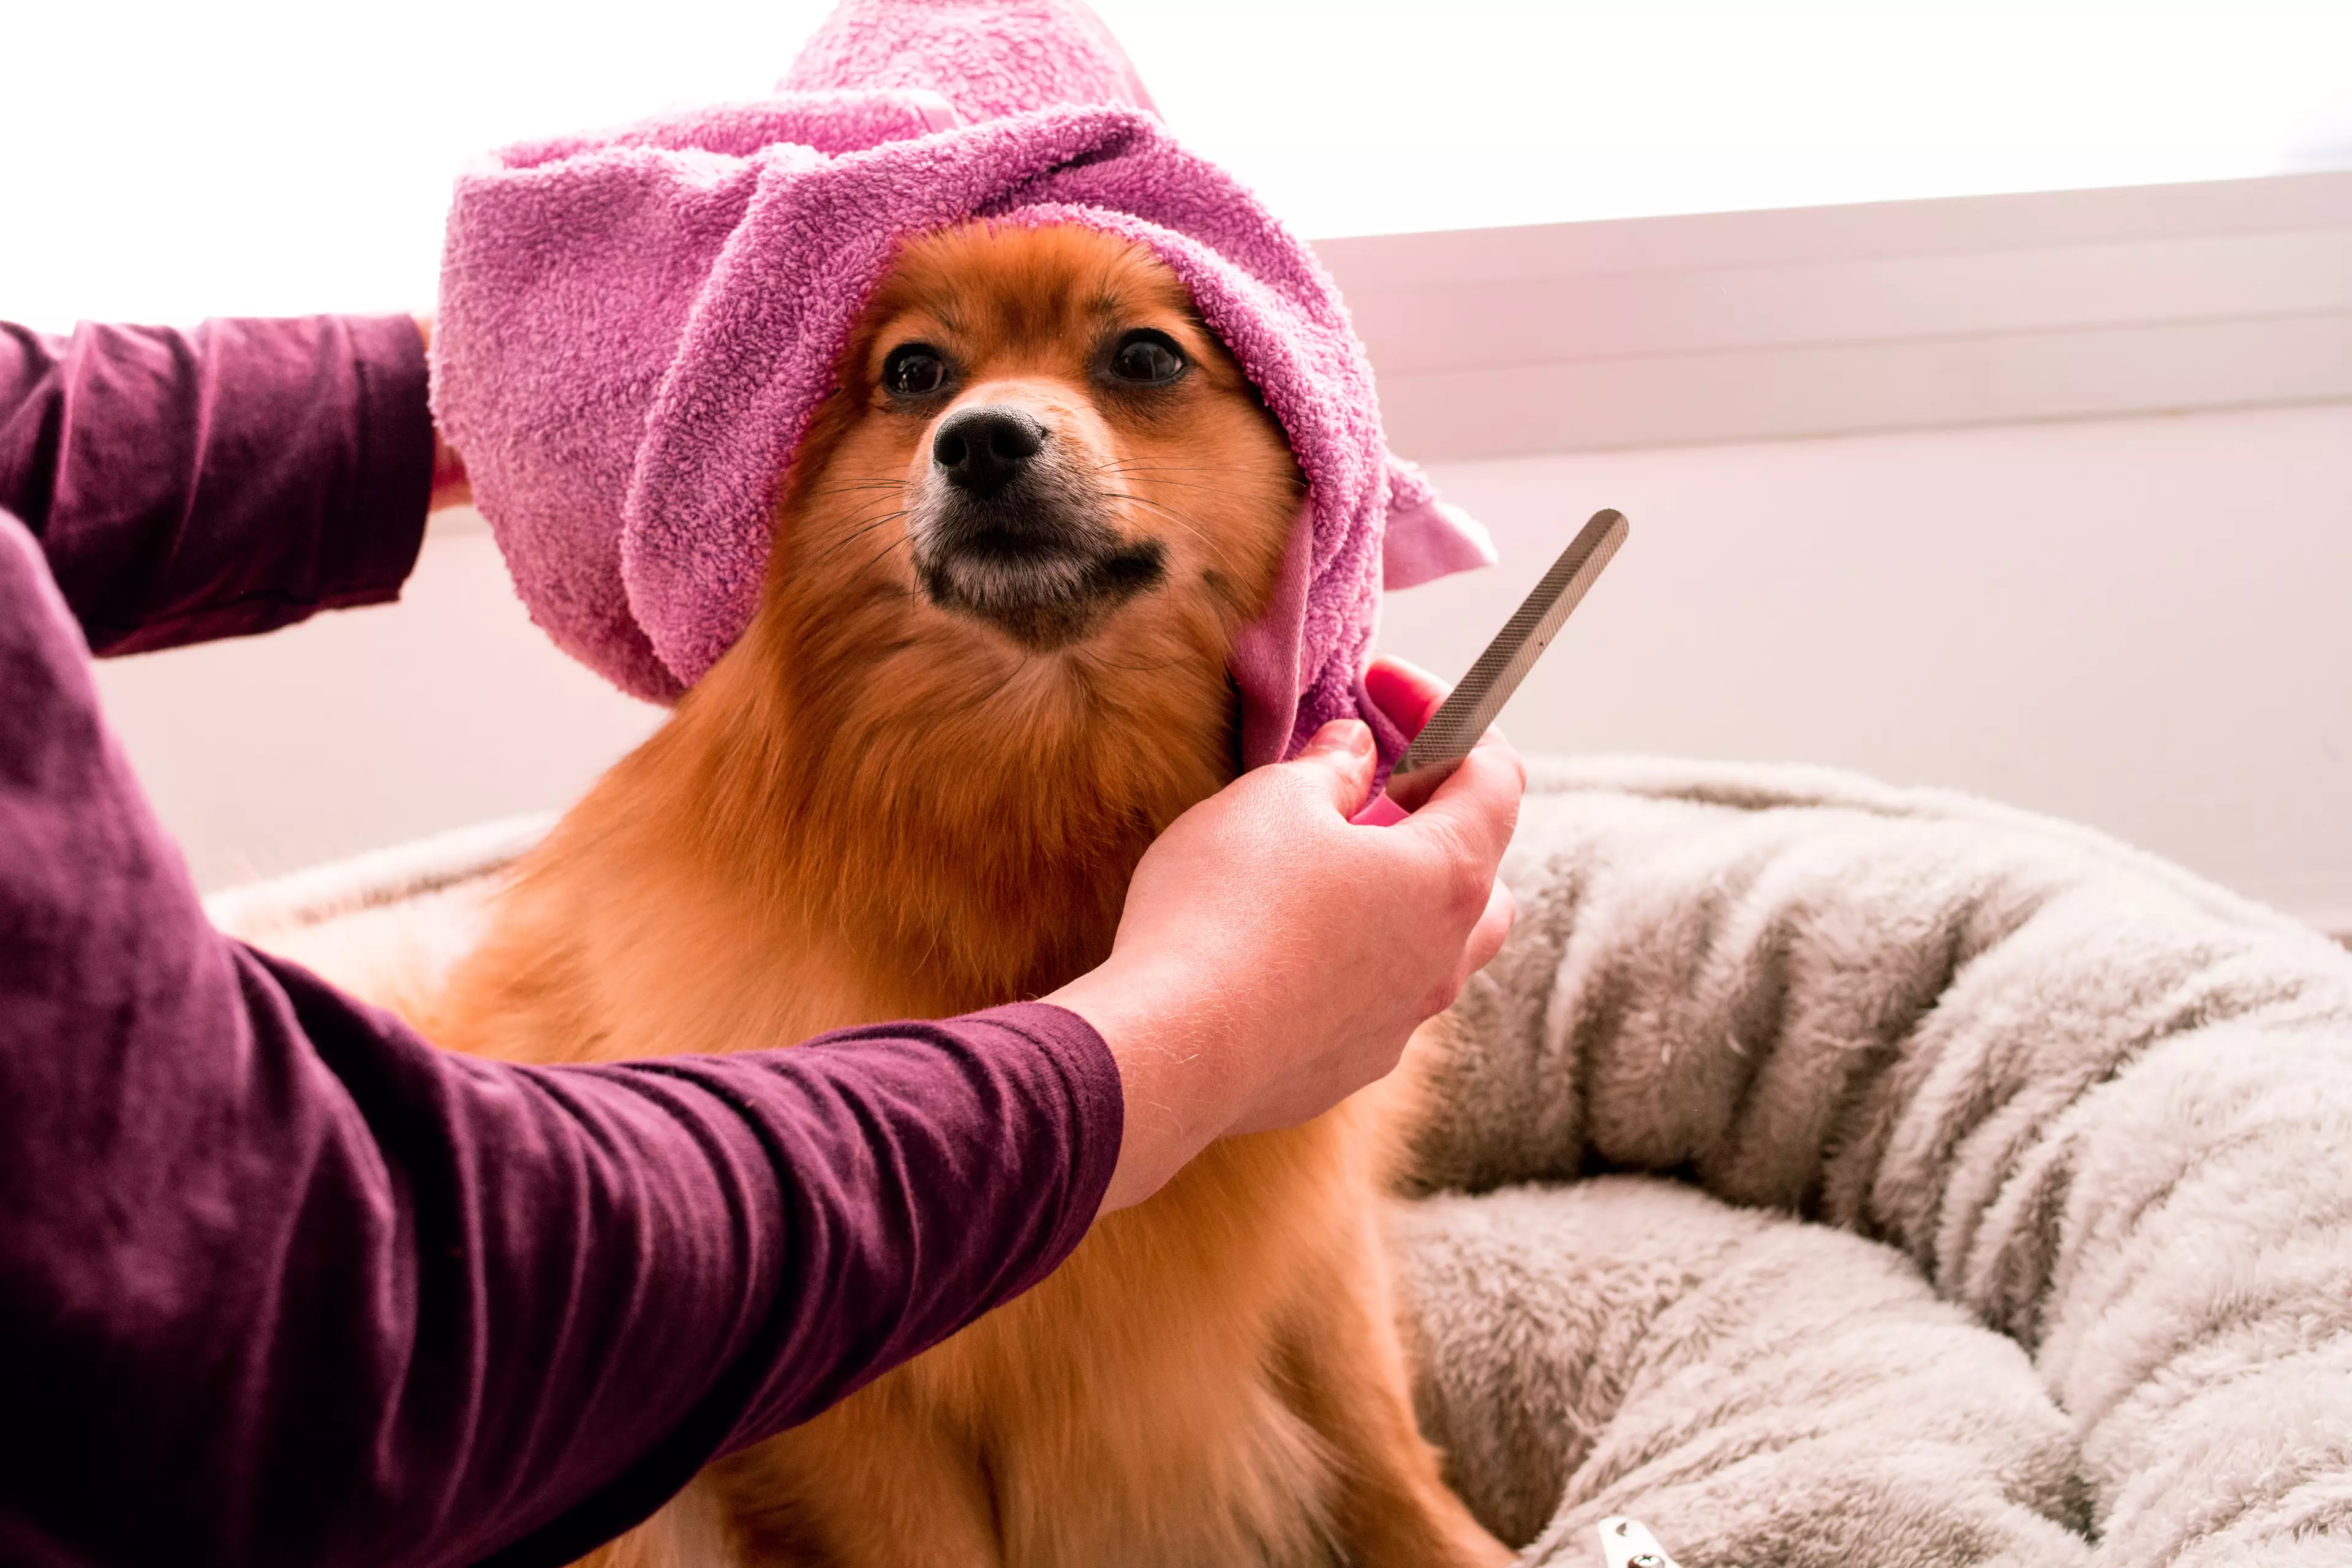 Regular grooming is also an essential part of caring for a dog's health and wellbeing (